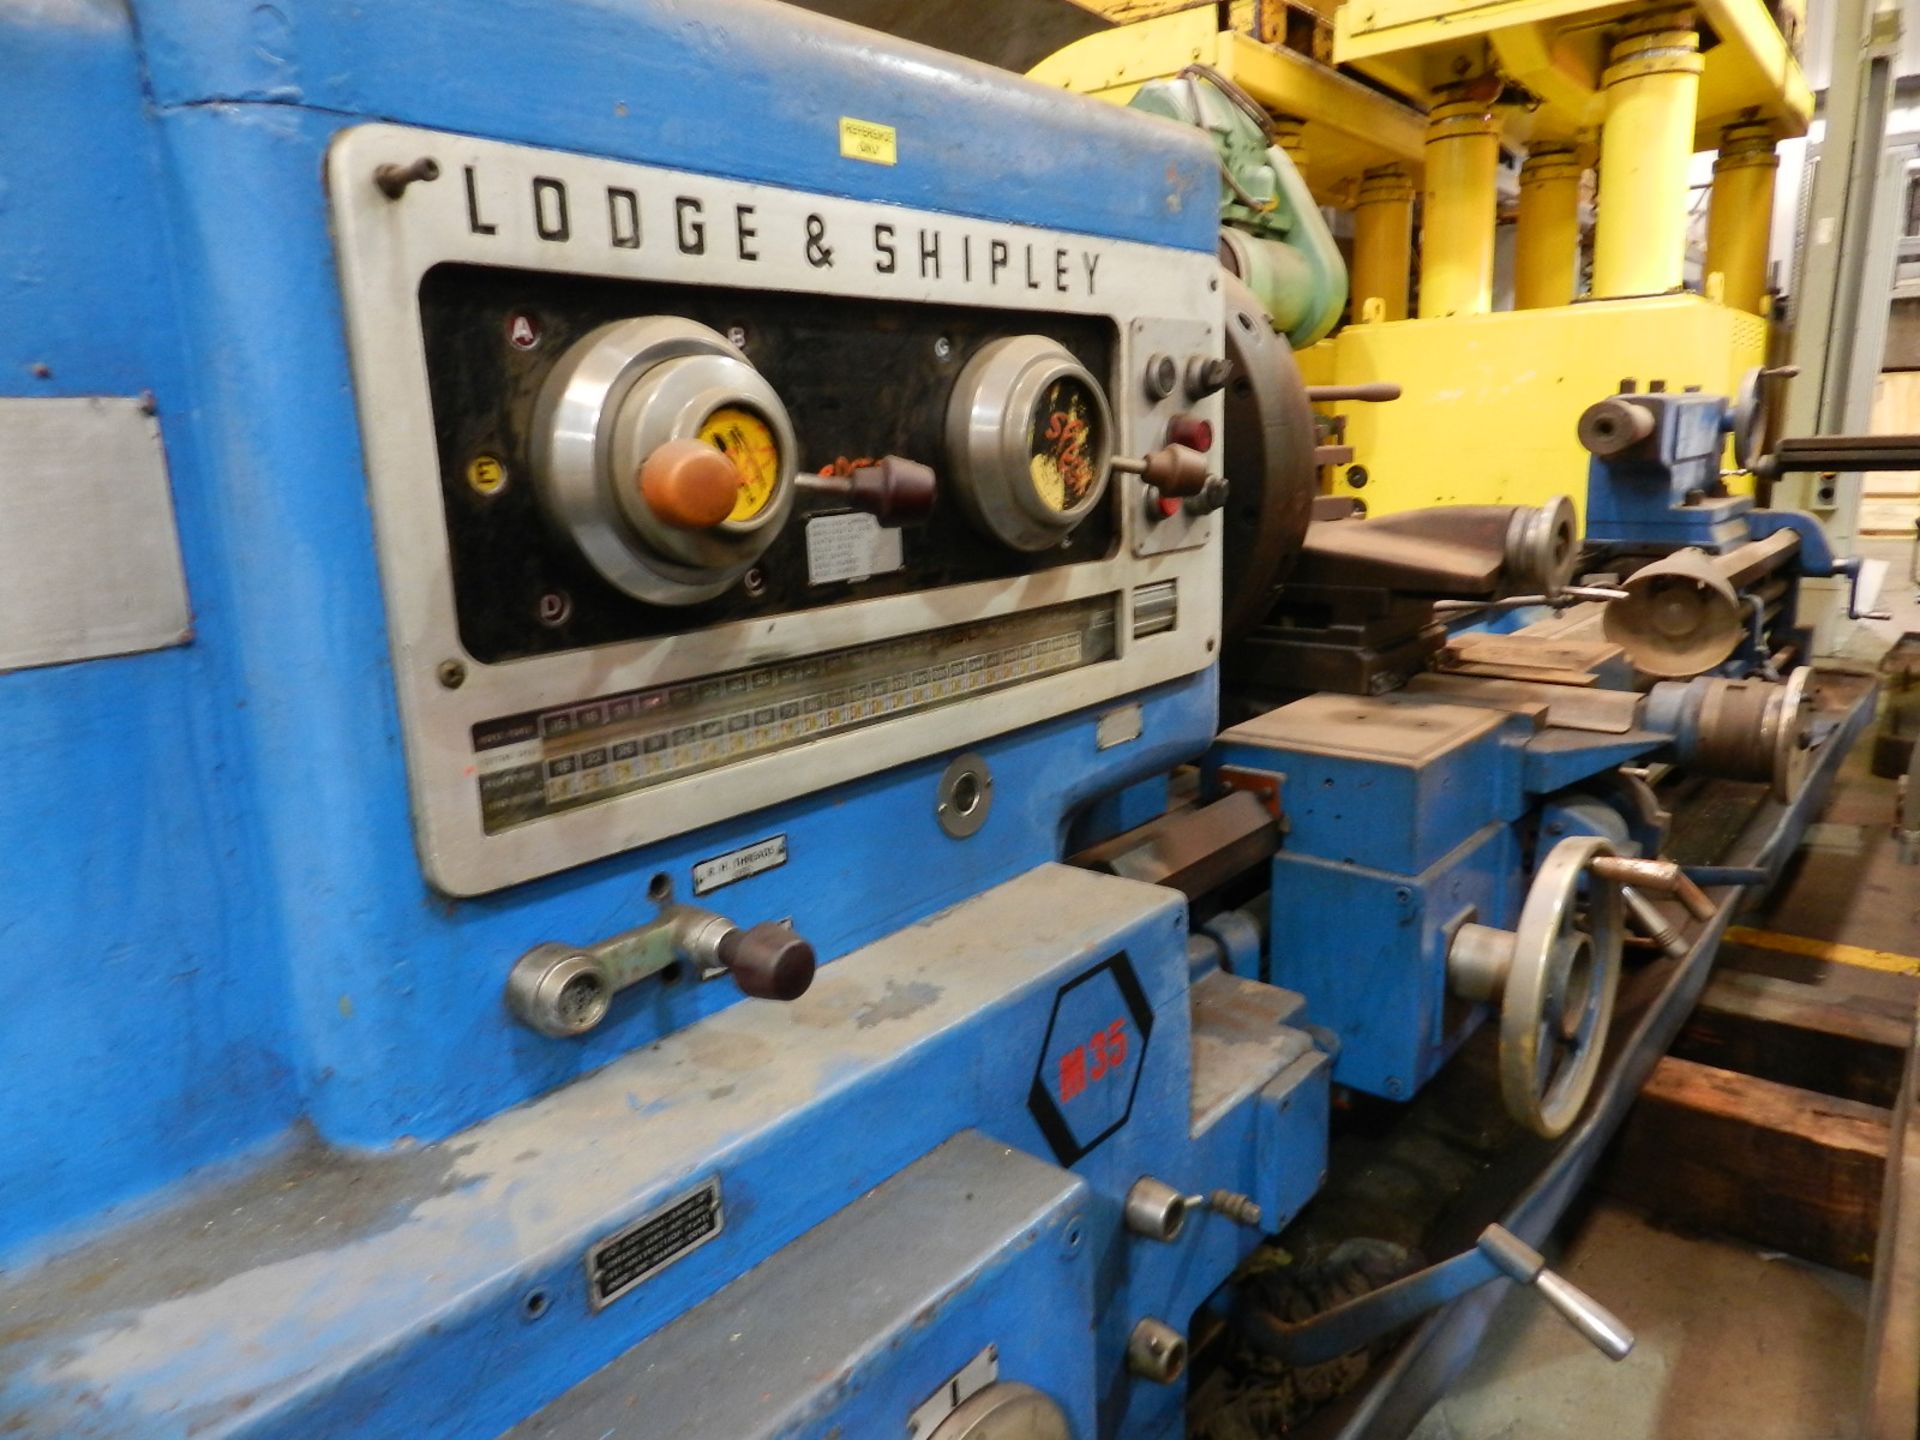 LODGE & SHIPLEY M35 ENGINE LATHE, 96" BETWEEN CENTERS, 21" 3-JAW CHUCK, TAILSTOCK - Image 2 of 16